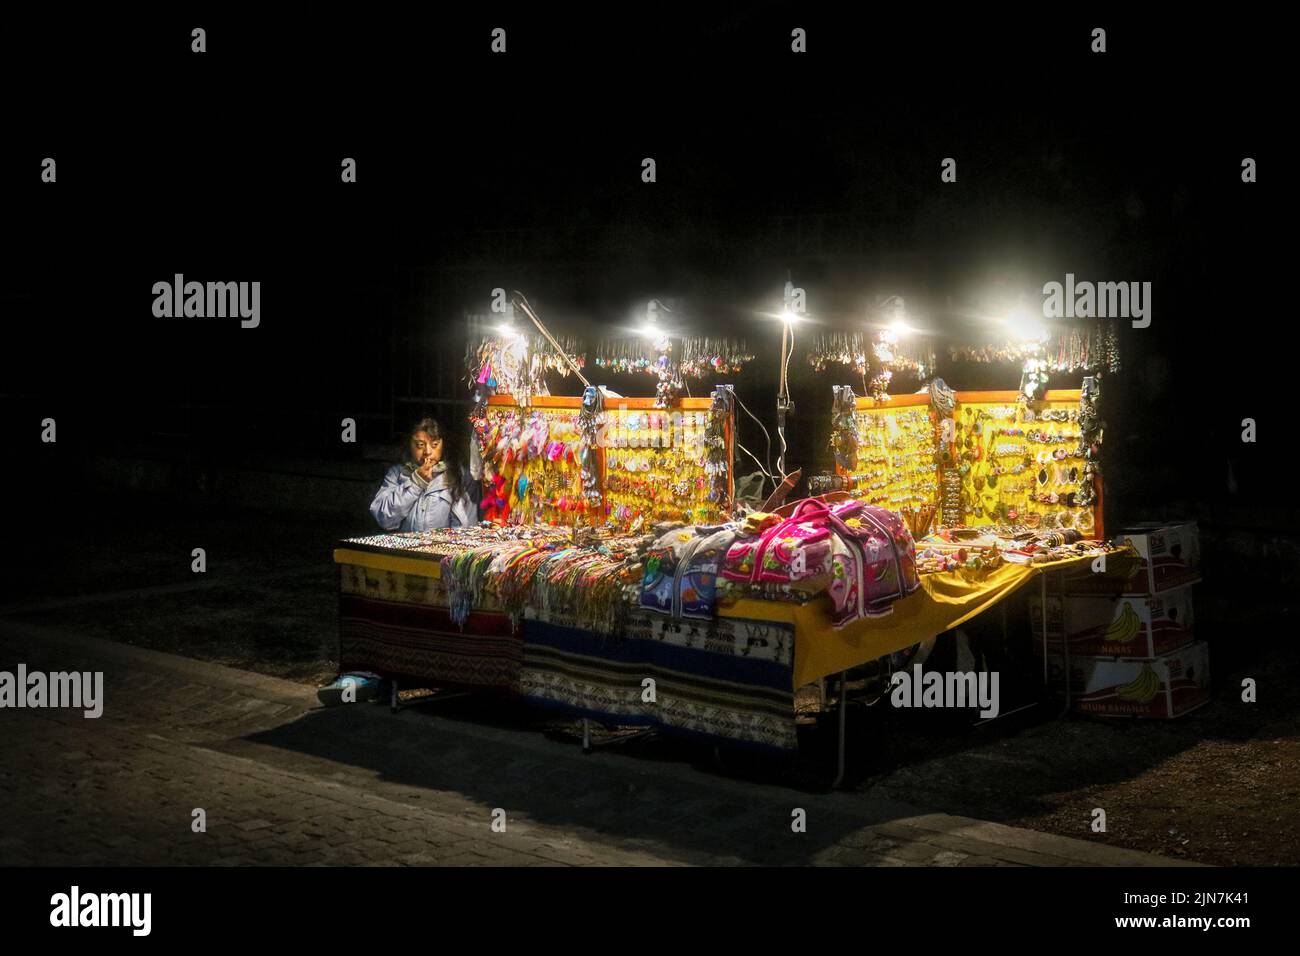 Vendor sitting at lit up outdoor table displaying jewelry and other souvenirs at night in Athens Greece Stock Photo